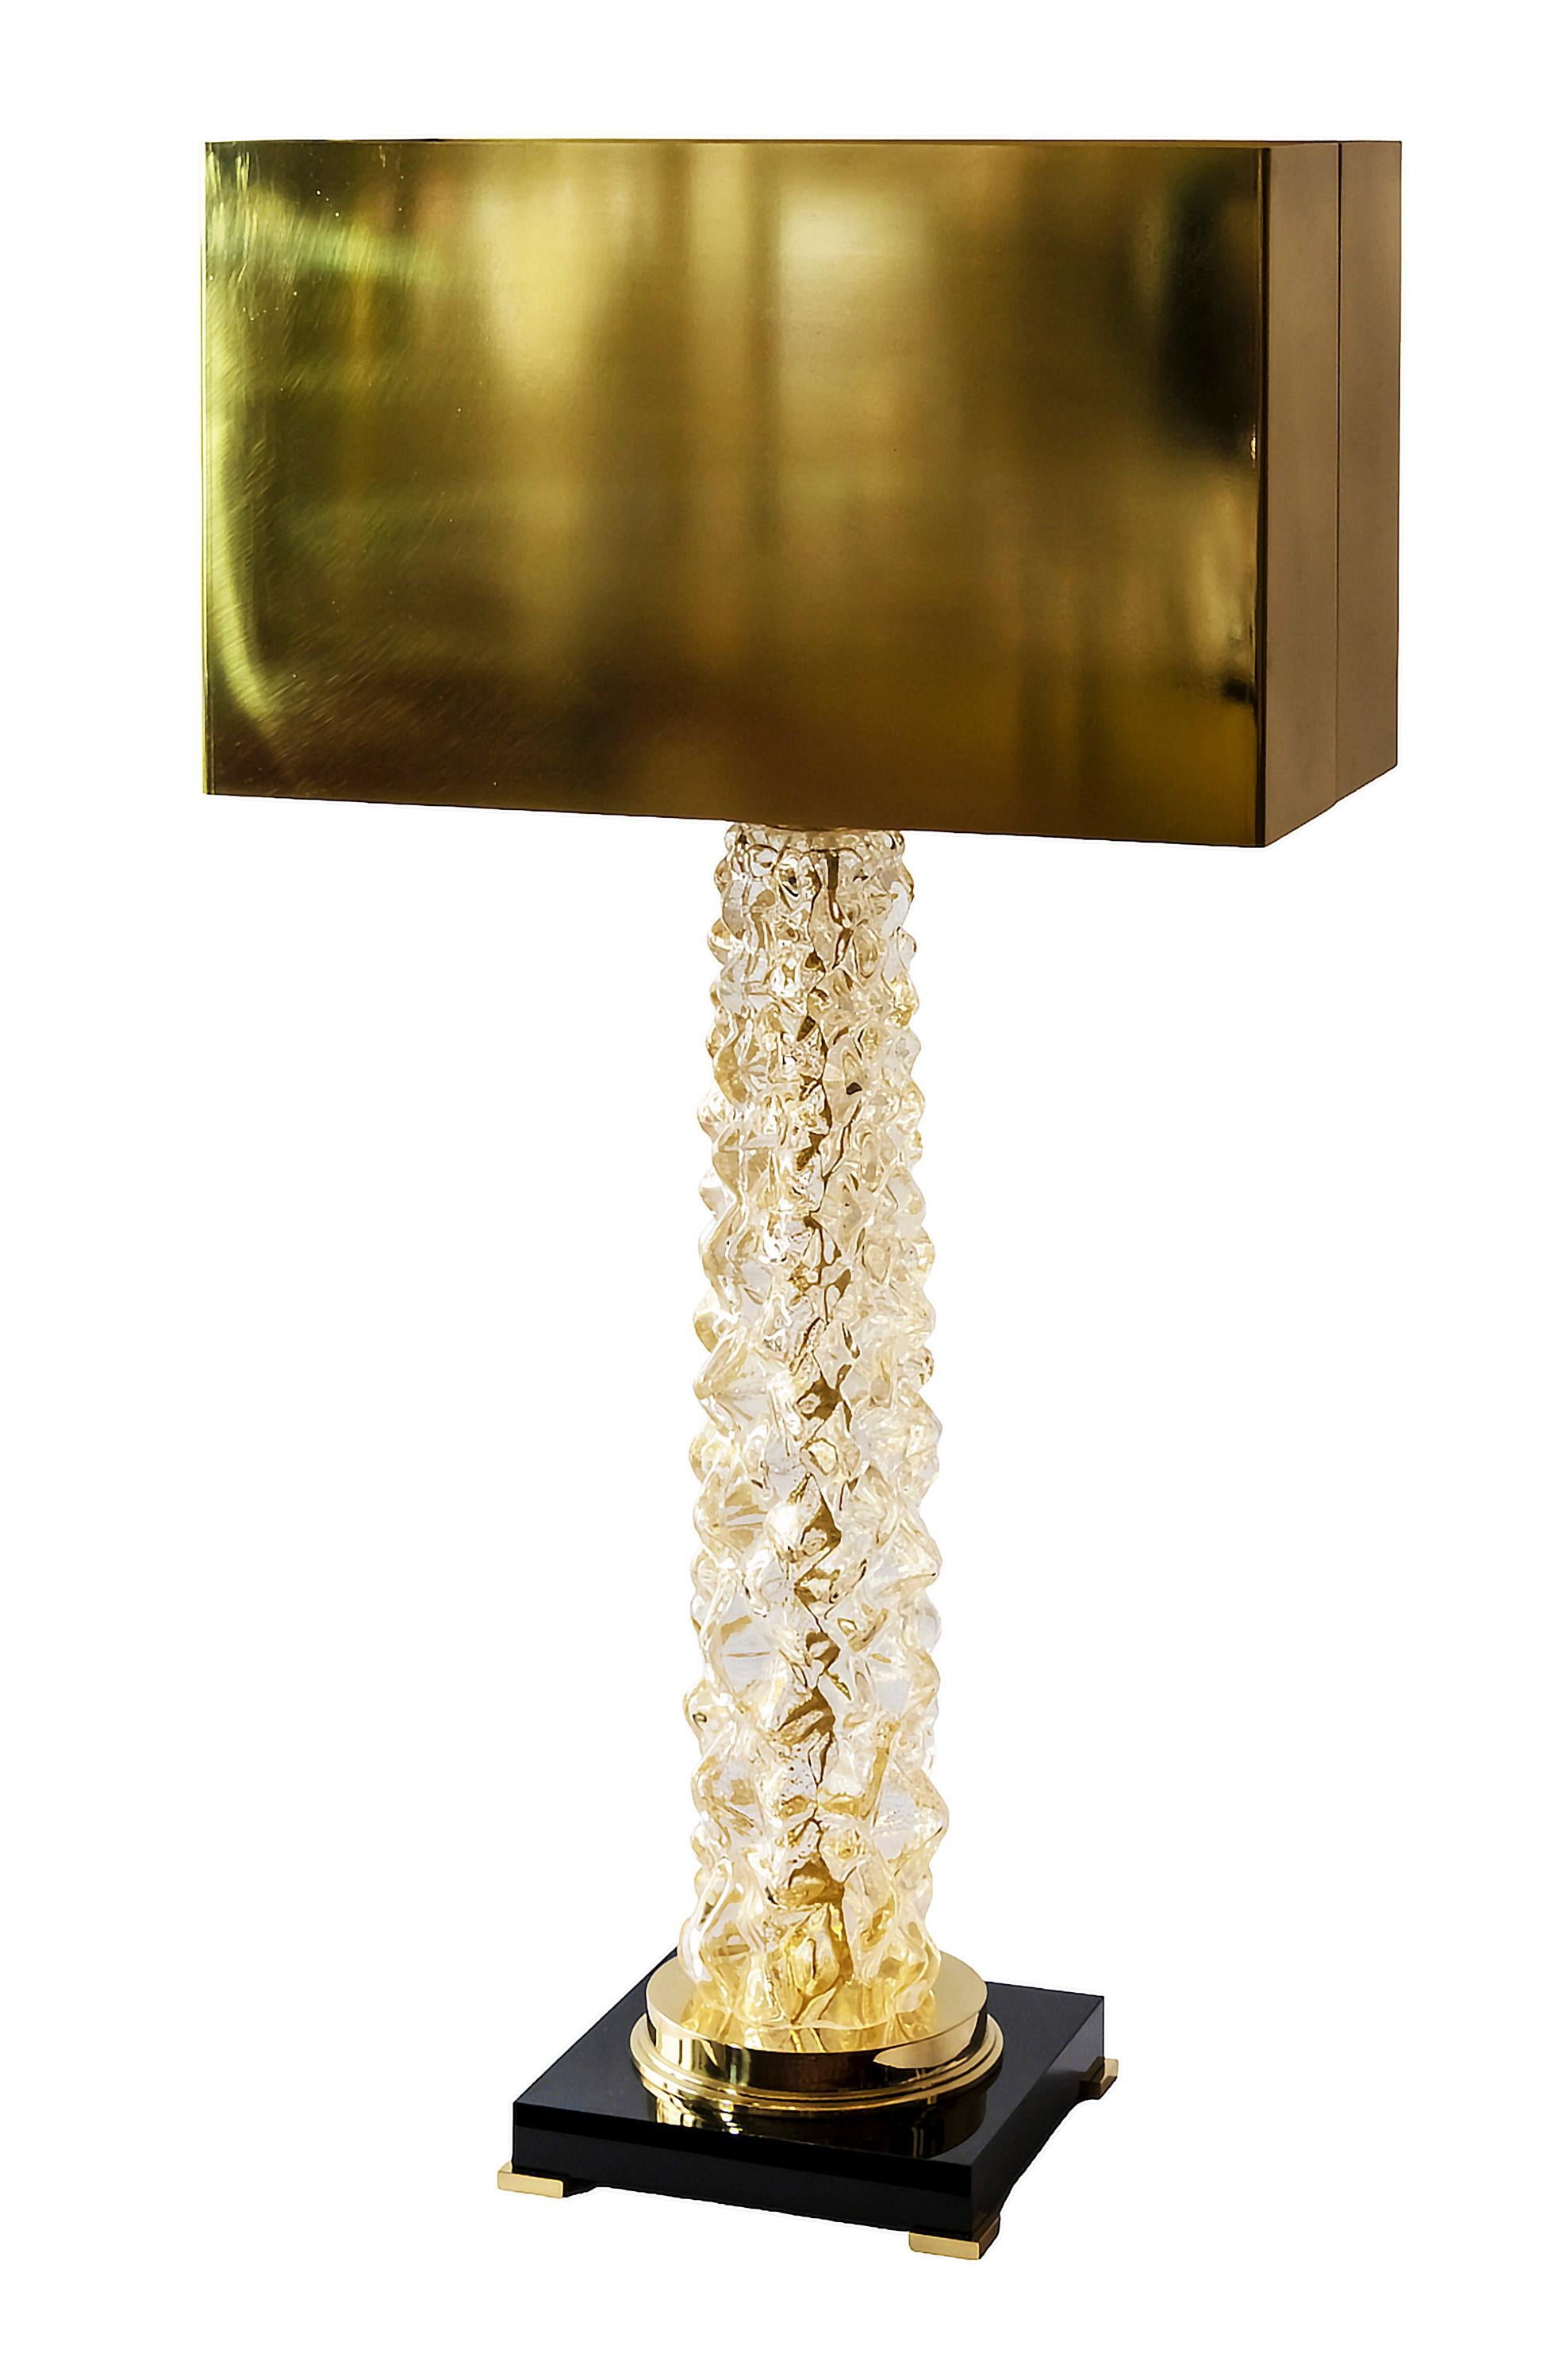 Pair of Italian table lamps are made of transparent Murano glass. The base is made of rectangular thick black glass with small brass legs. Decorated with polished brass details. Both lamps are with new made solid brass shades.
Dimensions: High 85